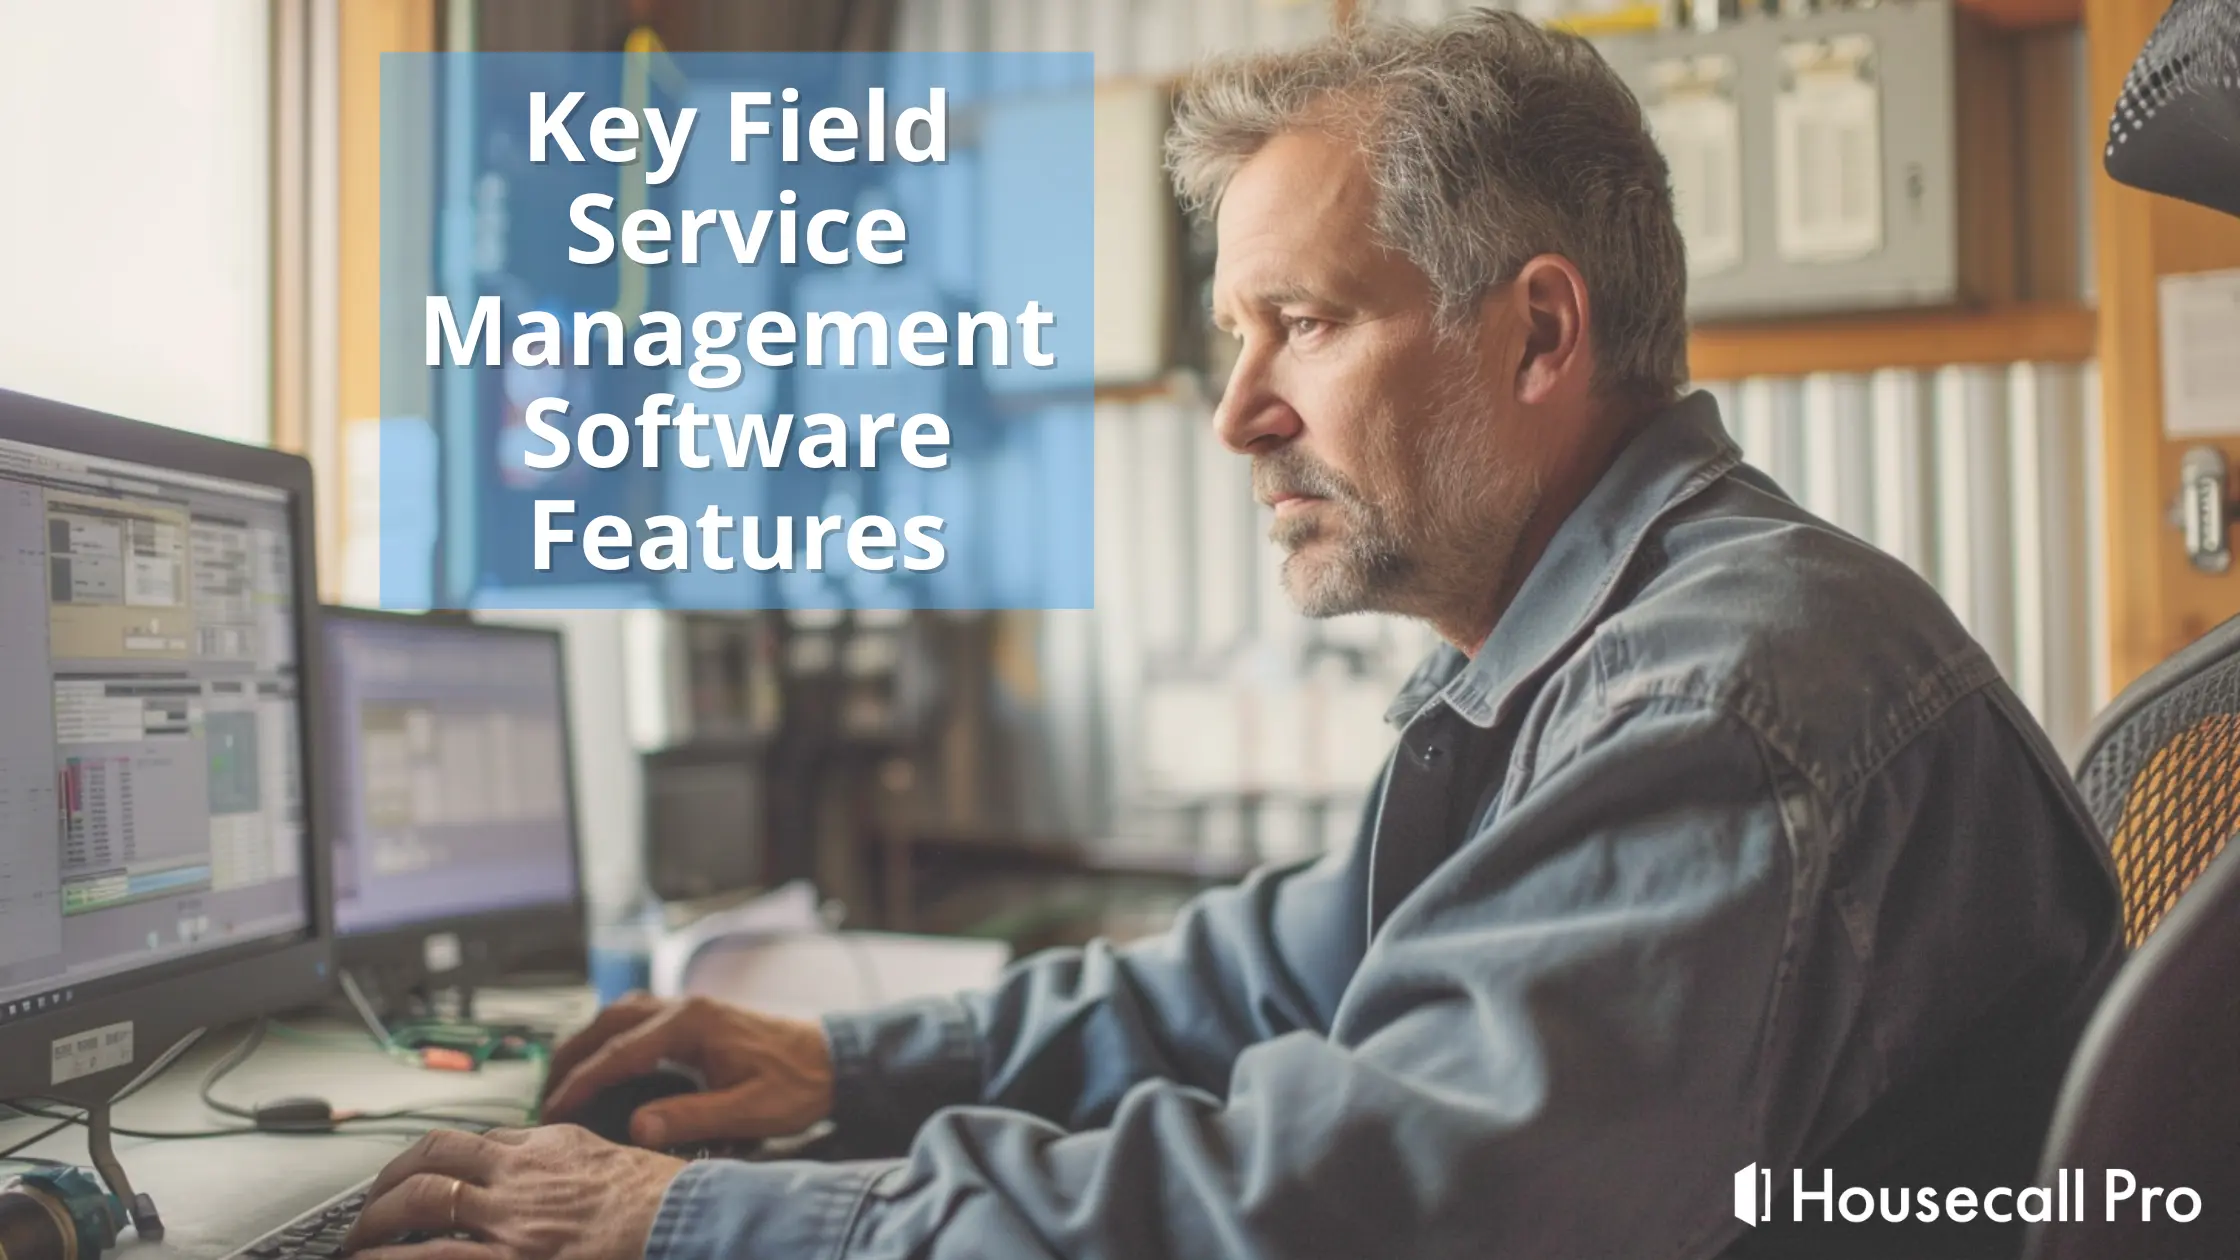 Key Field Service Management Software Features